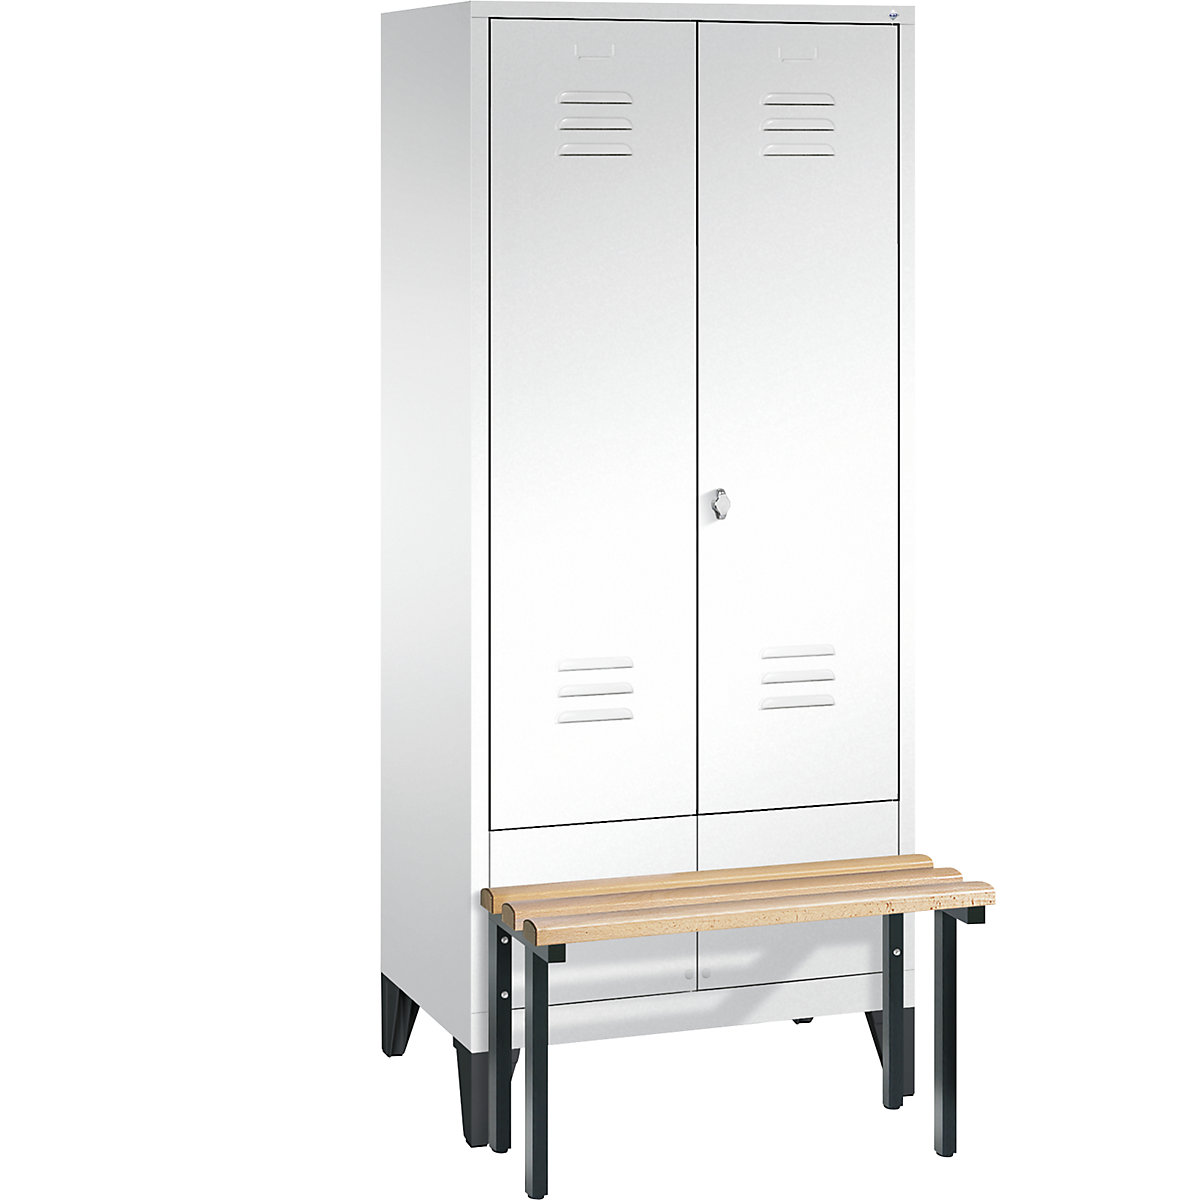 CLASSIC cloakroom locker with bench mounted at front, doors close in the middle – C+P